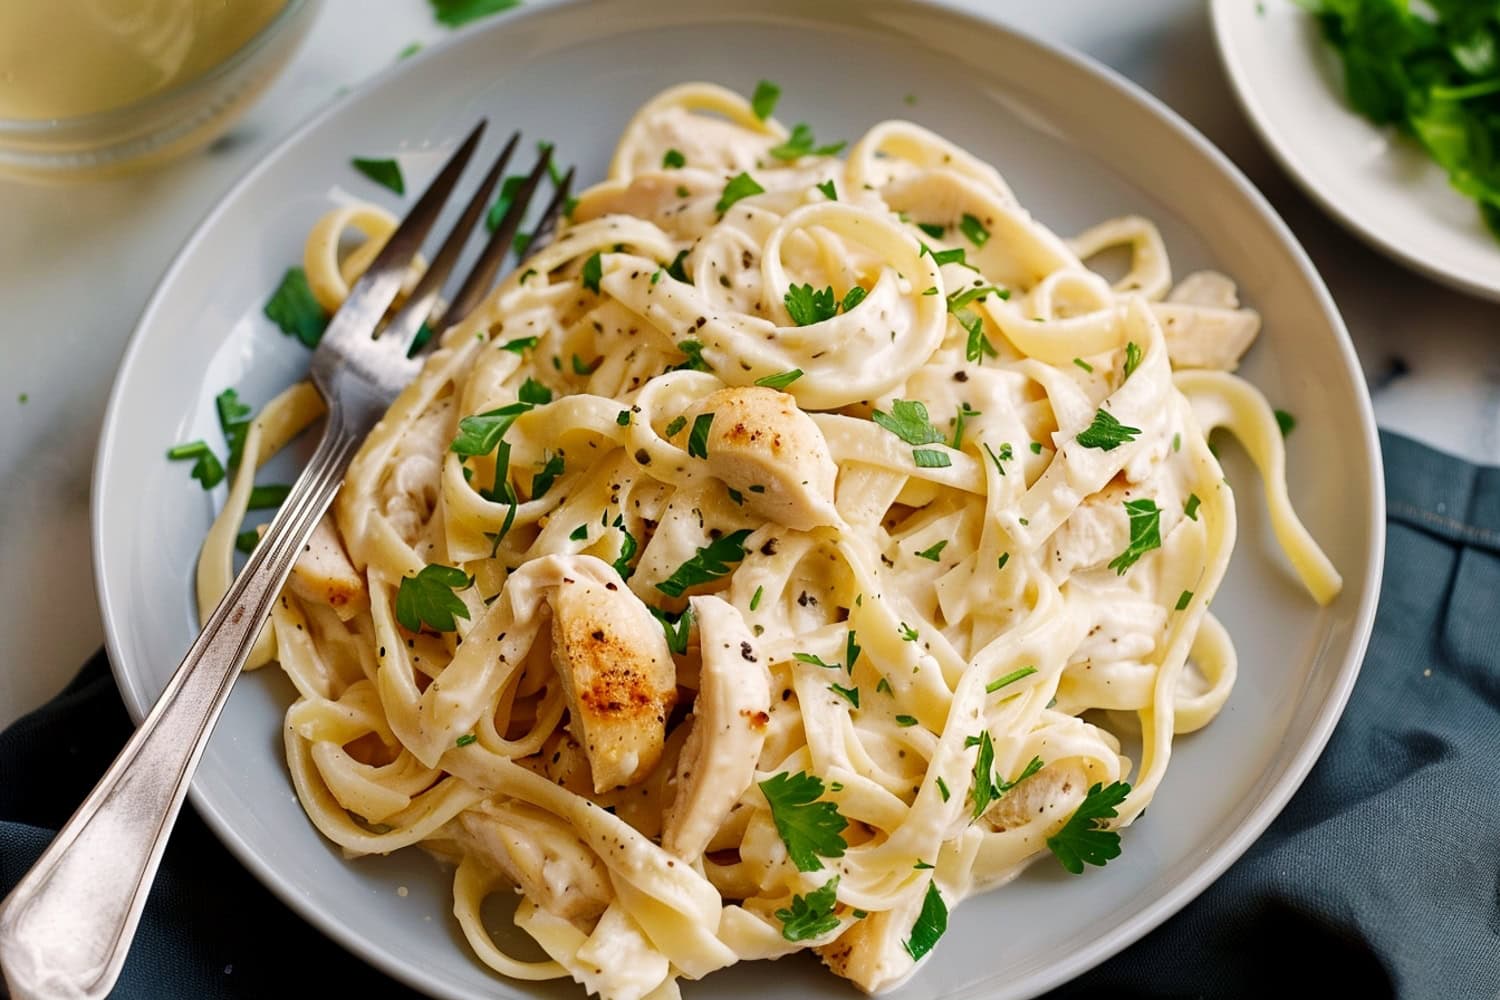 Creamy pasta, featuring tender chicken strips and fettuccine in a rich alfredo sauce.